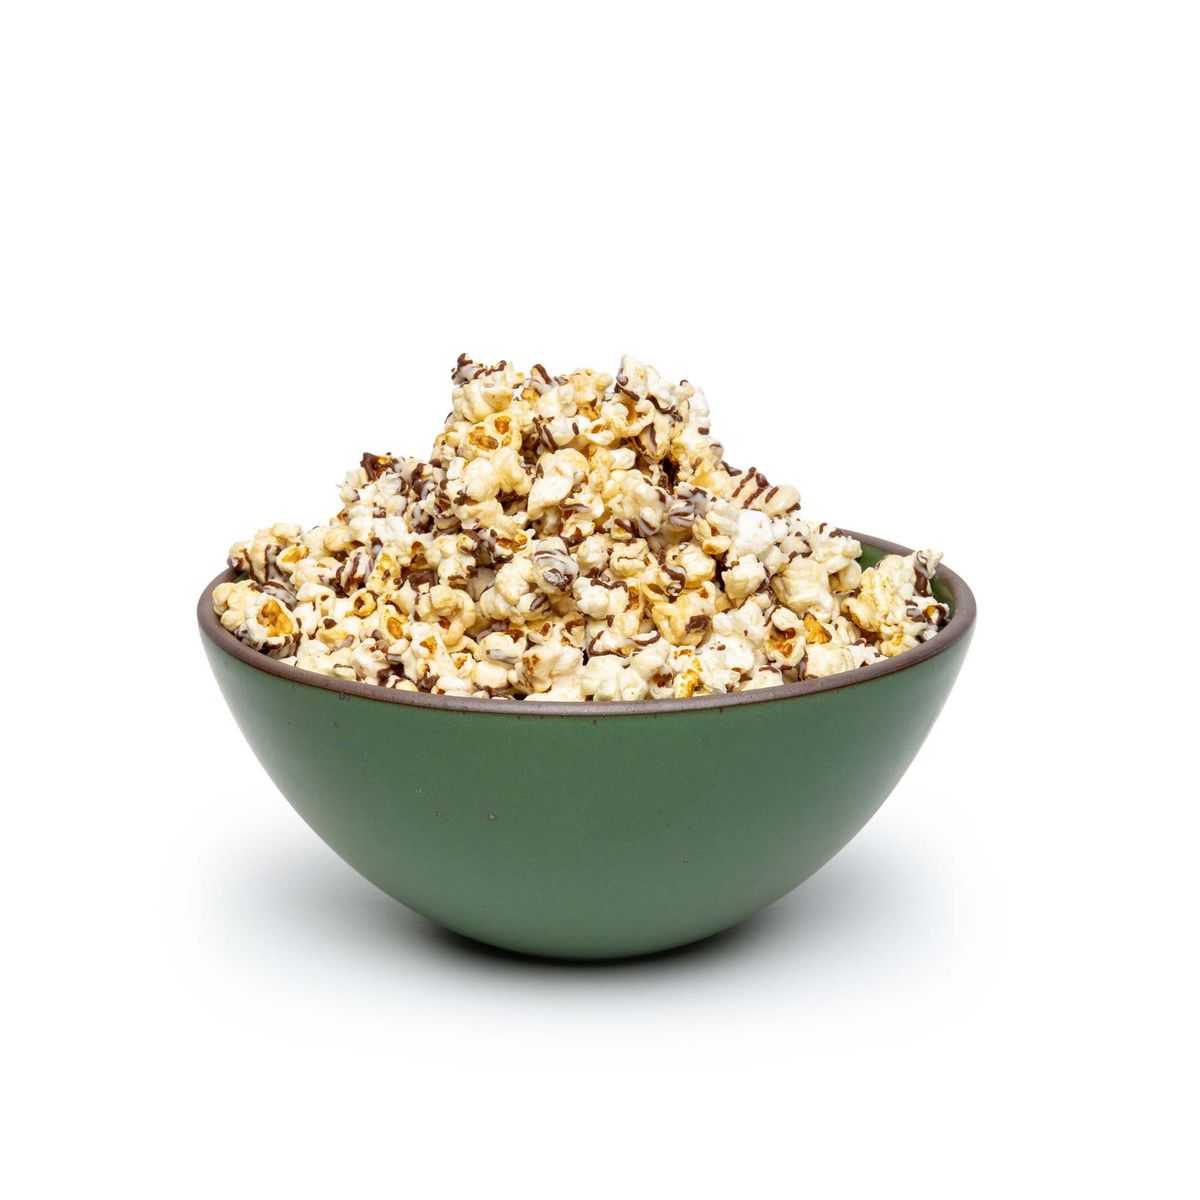 A large rounded ceramic bowl in a deep, verdant green color featuring iron speckles and an unglazed rim, filled with popcorn